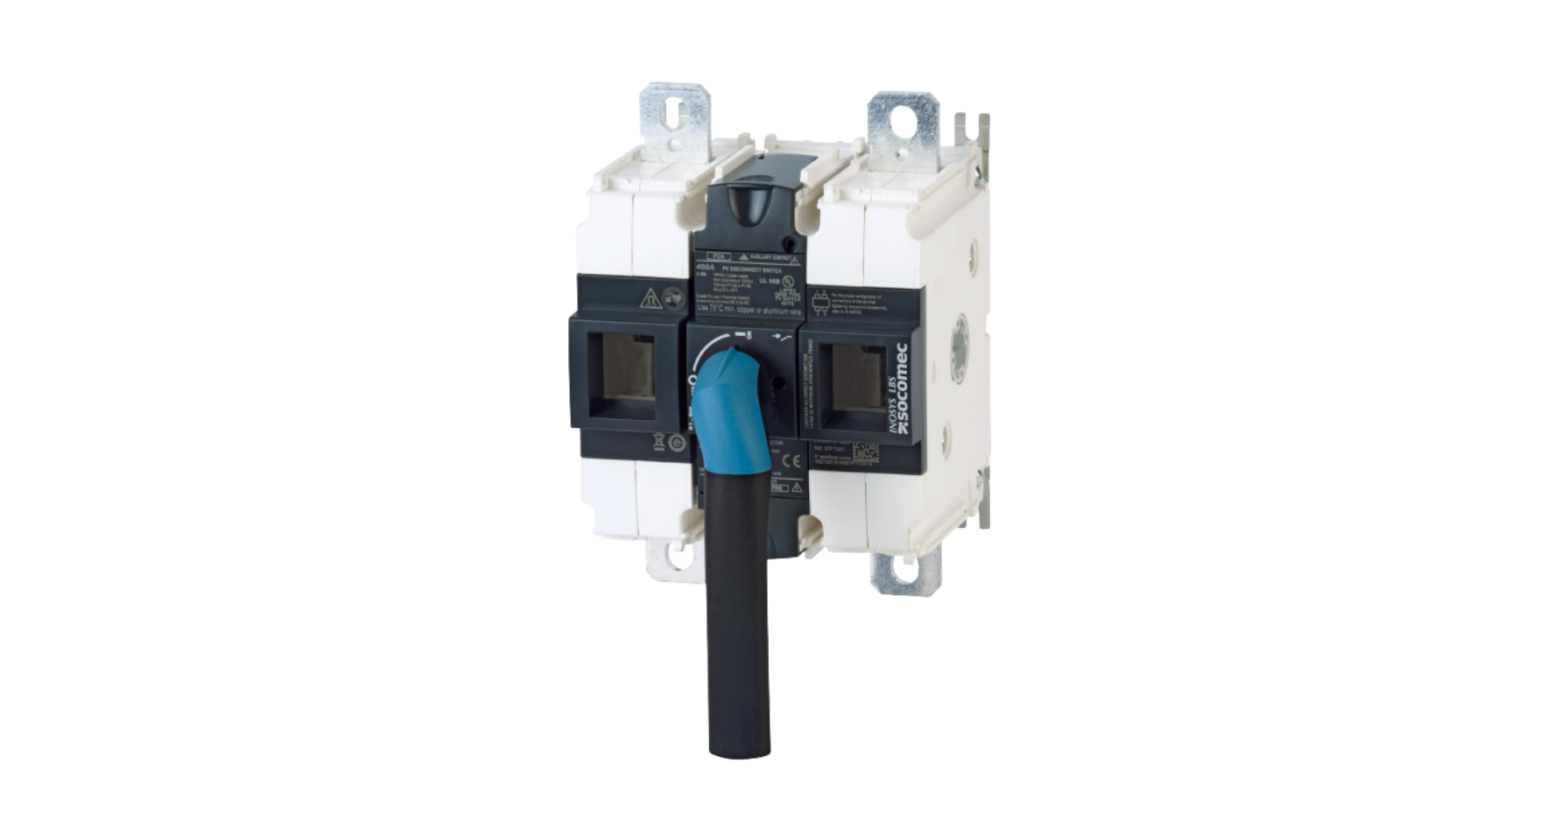 INOSYS LBS Load Break Switches for DC and PV Applications User Guide